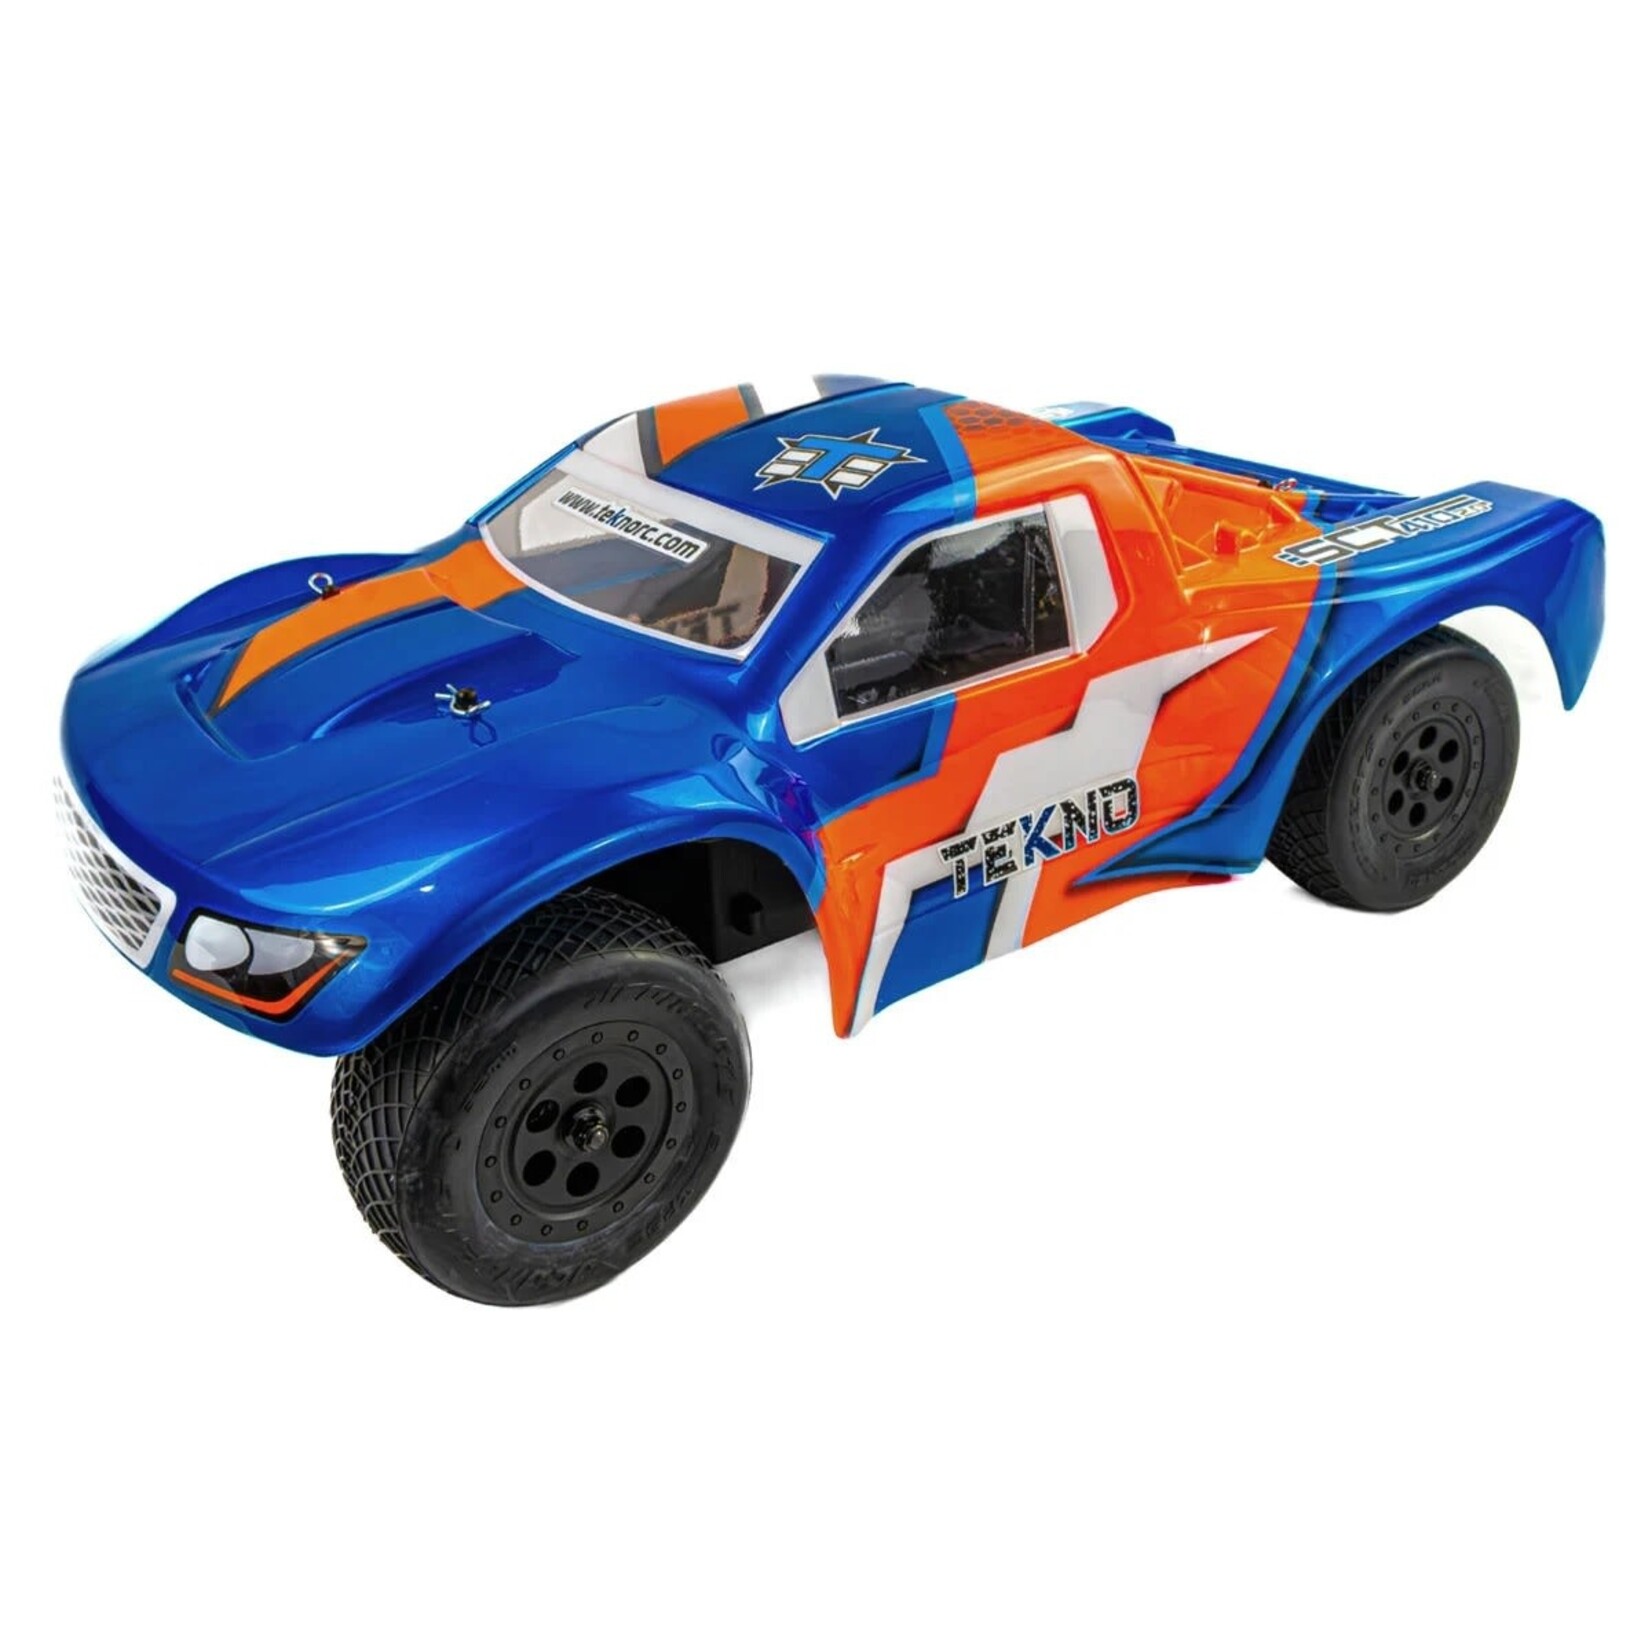 Tekno RC Tekno RC SCT410 2.0 Competition 1/10 Electric 4WD Short Course Truck Kit #TKR9500